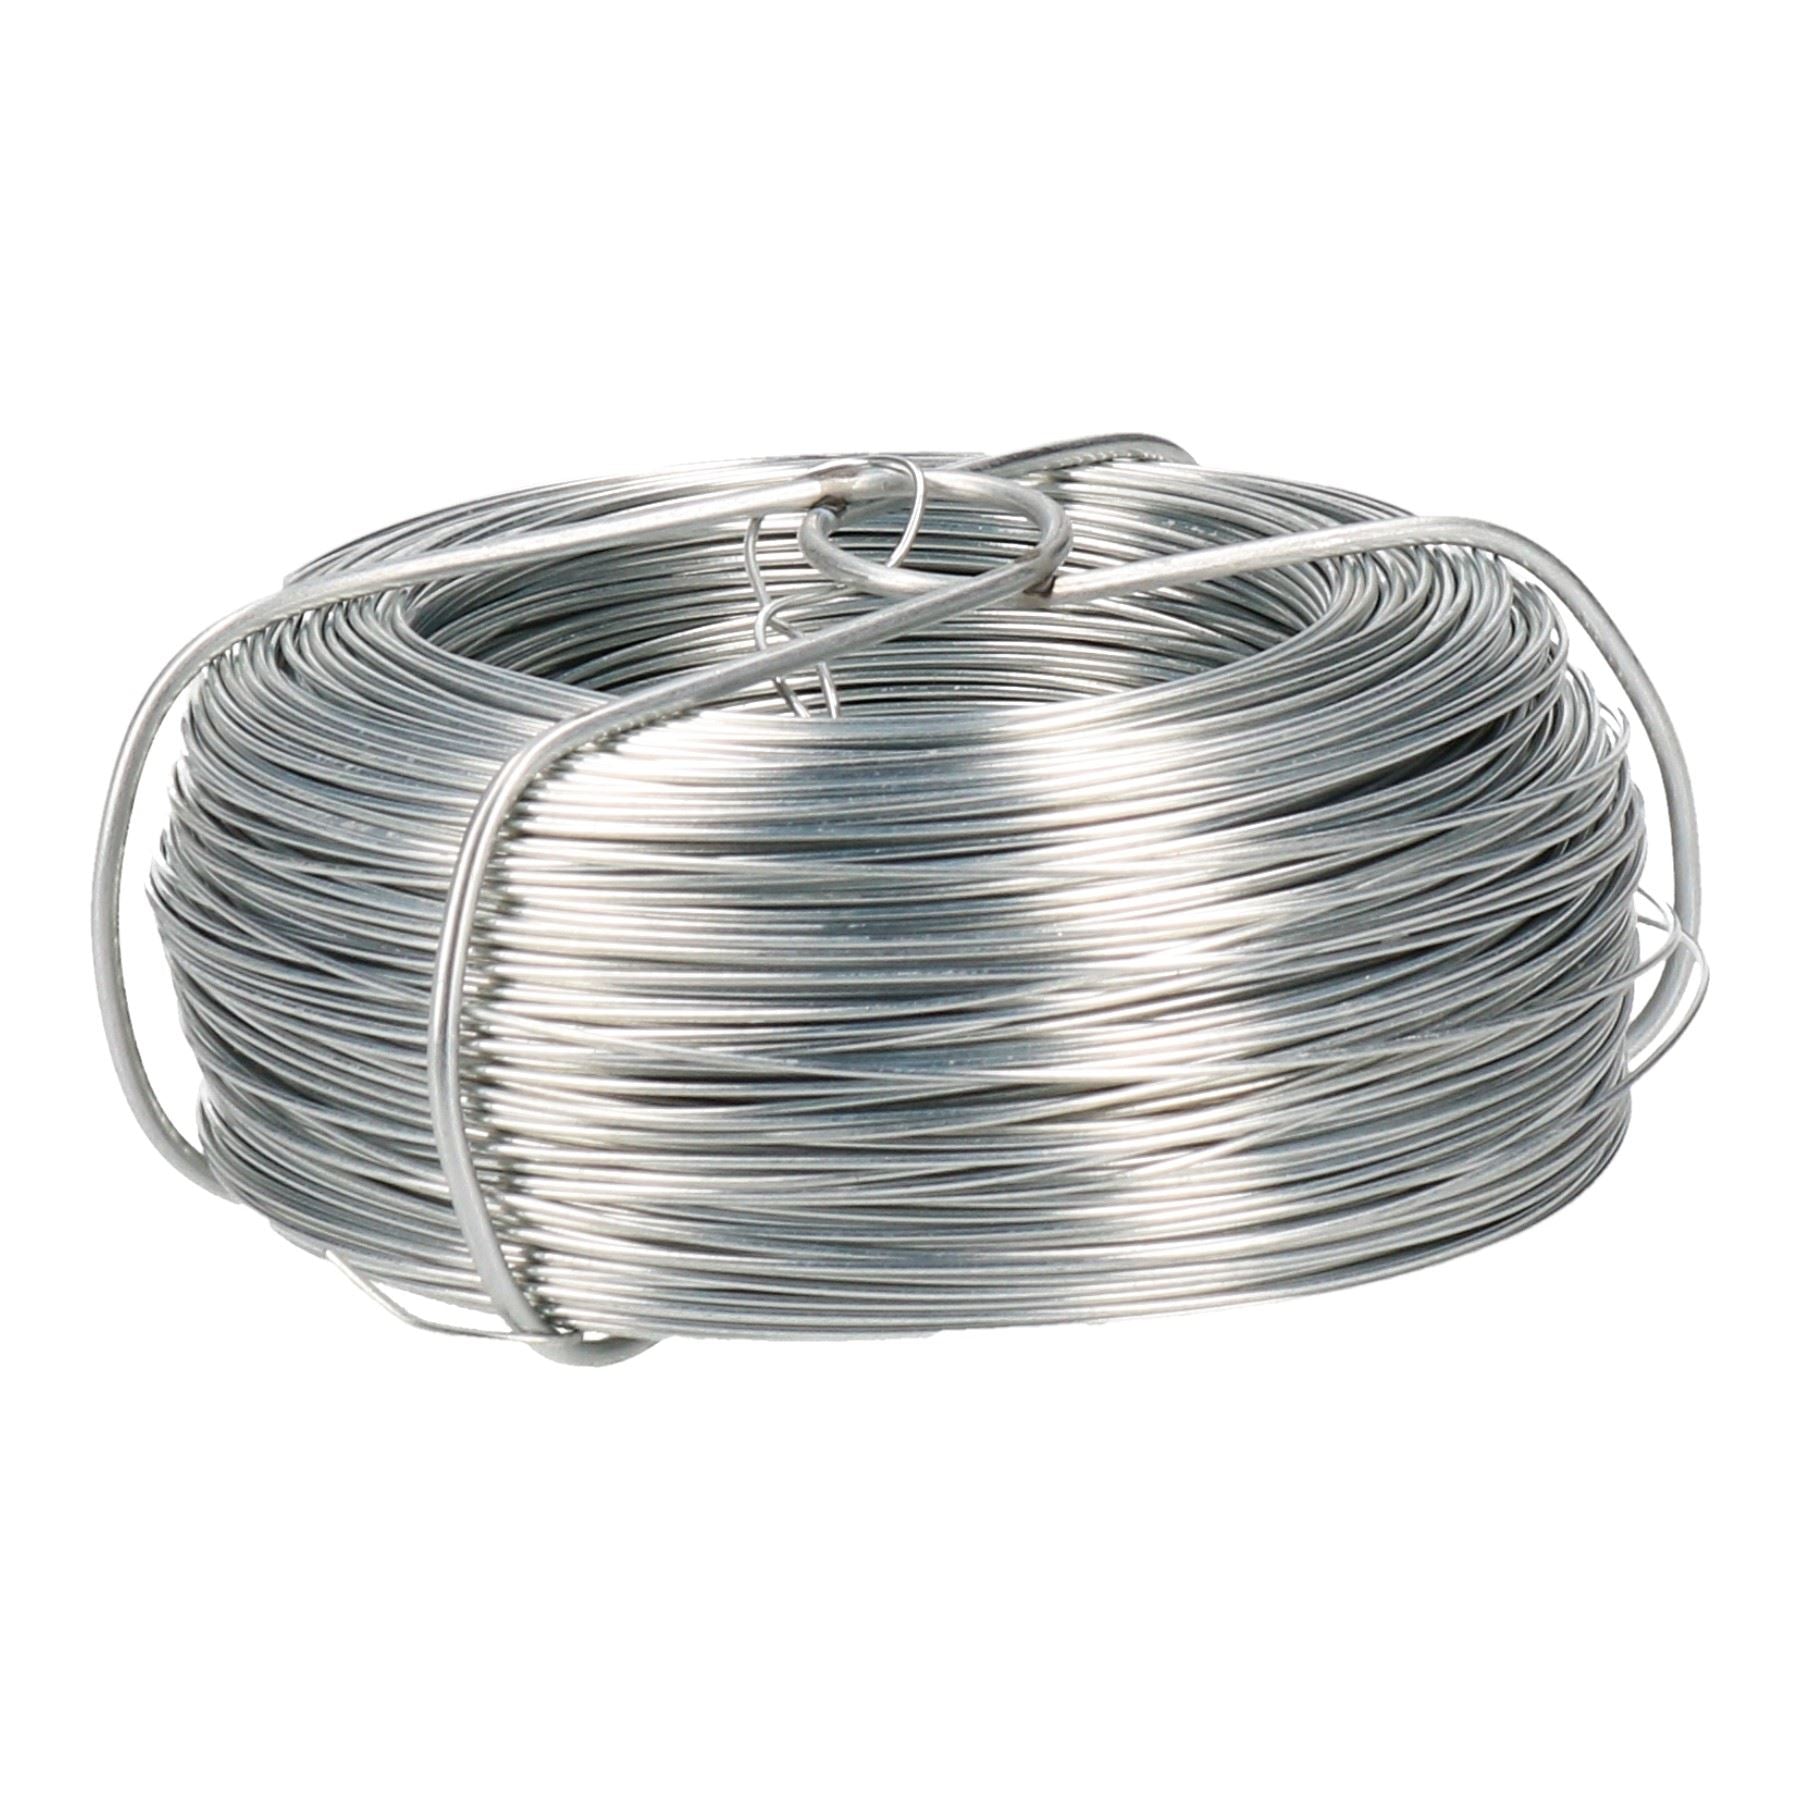 Zinc Plated Wire Roll Hanging Pictures Garden Wire 125 metres x 0.7mm Thick